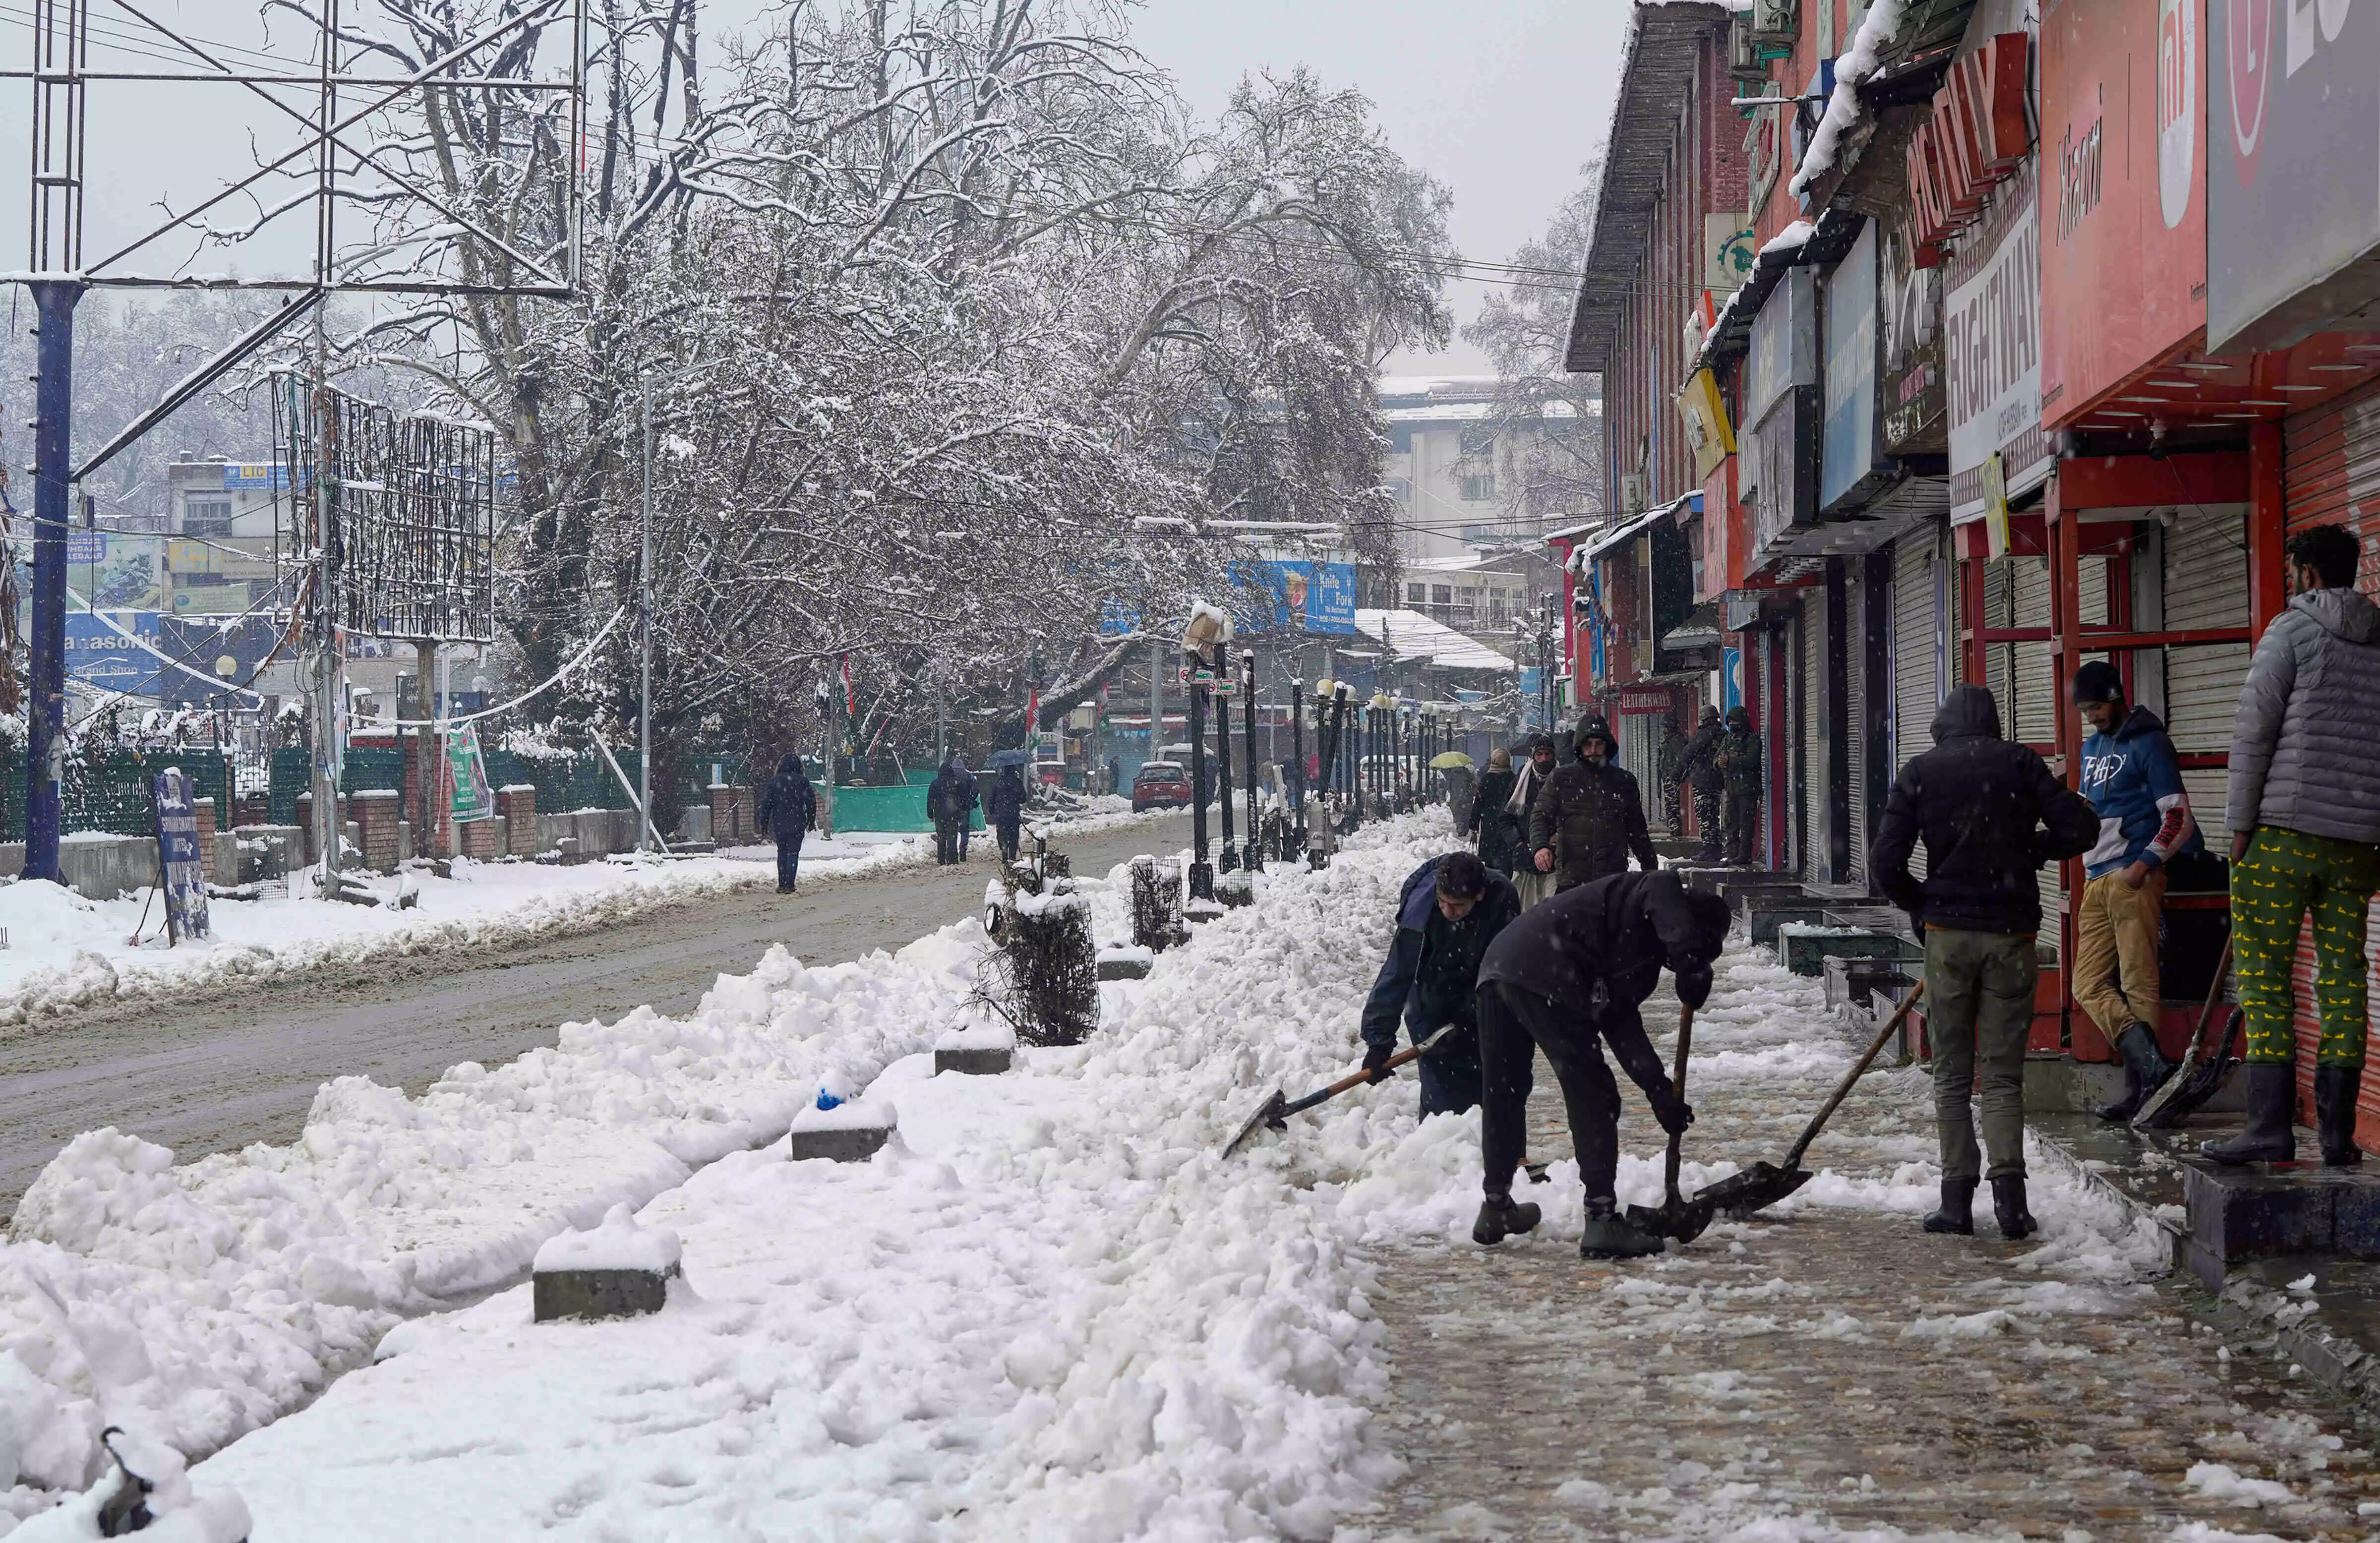 Himachal Pradesh: 3 national highways among 479 roads blocked due to recent snowfall in higher reaches, tribal areas